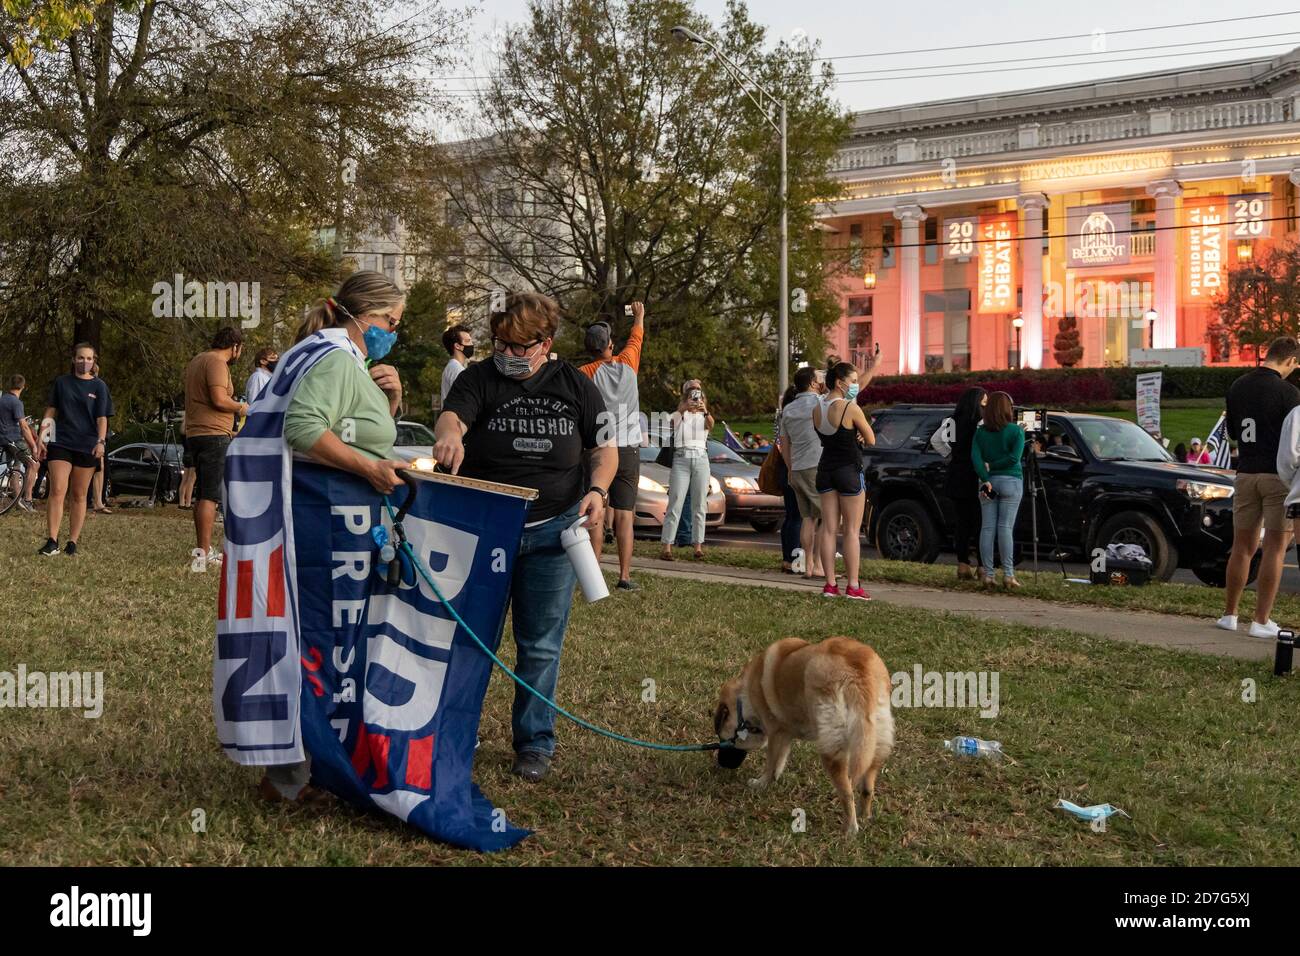 Nashville, Tennessee, USA, 22 October 2020 Crowds gather around the Belmont University campus on the eve of the final presidential debate between President Donald Trump and former Vice President Joe Biden. Supporters for each candidate display signs and banners. Credit: Sayre Berman/Alamy Live News Stock Photo